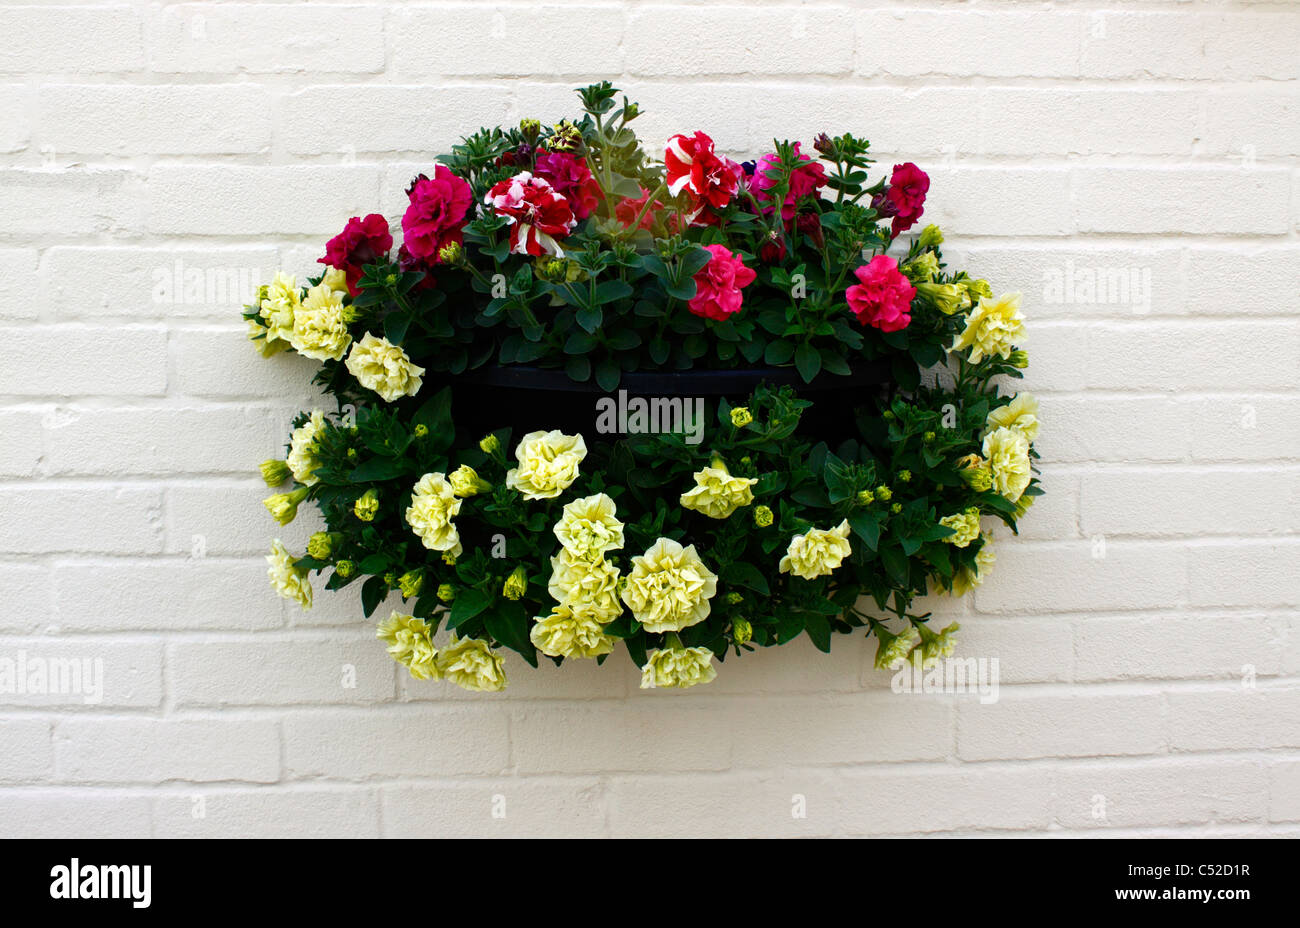 PETUNIAS GROWING IN A WALL BASKET. Stock Photo